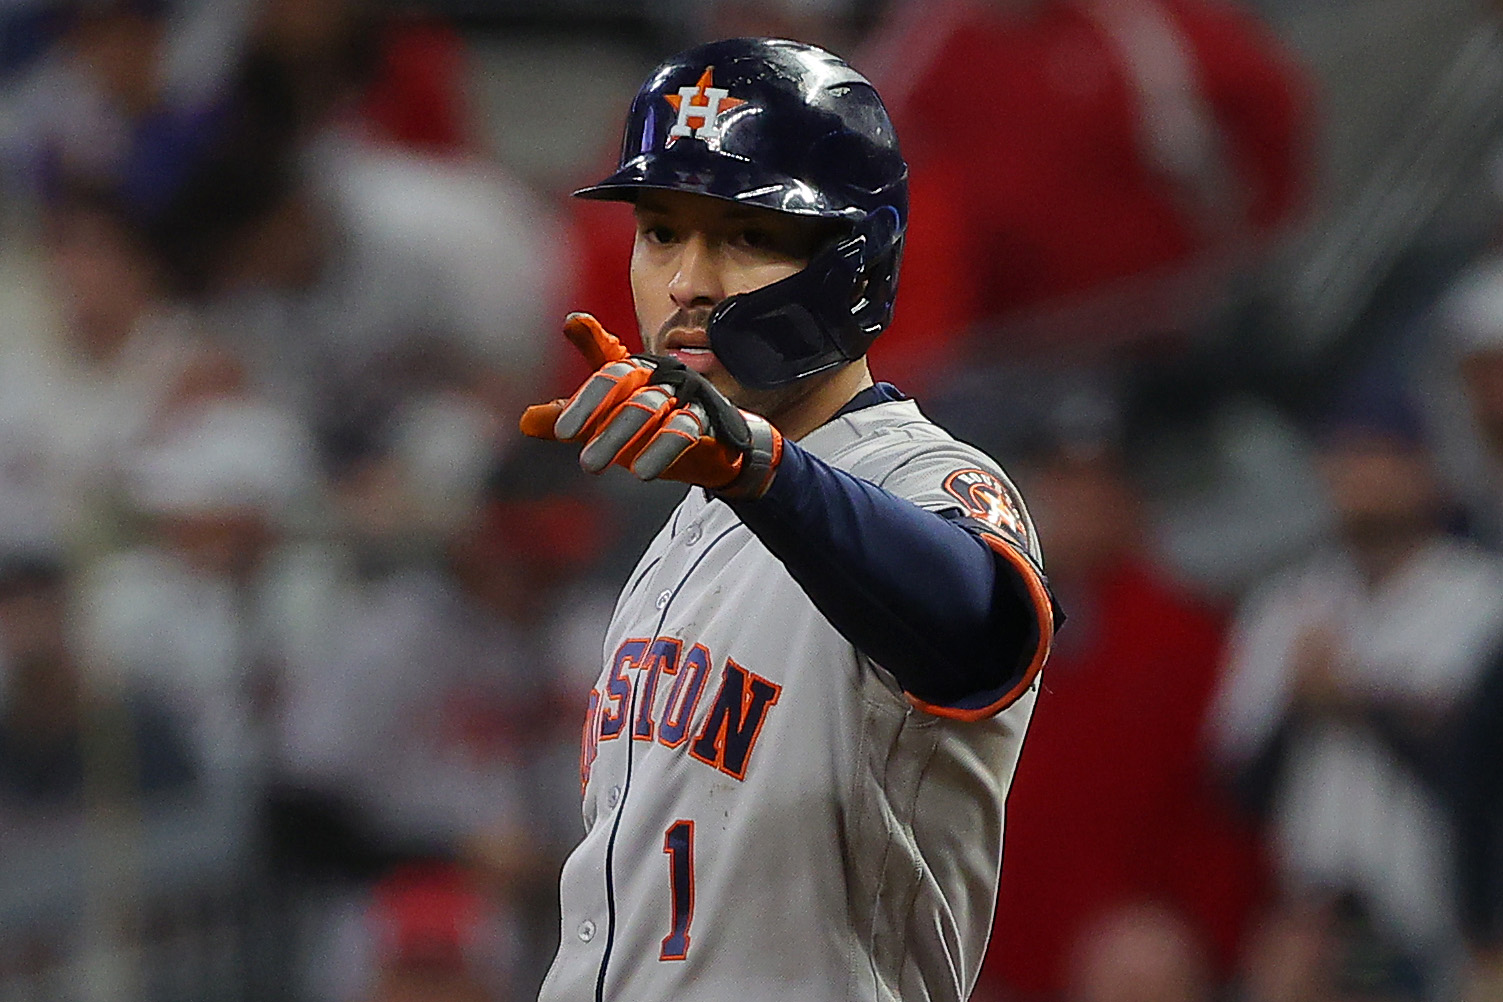 The LA Angels should absolutely sign Carlos Correa if given the chance